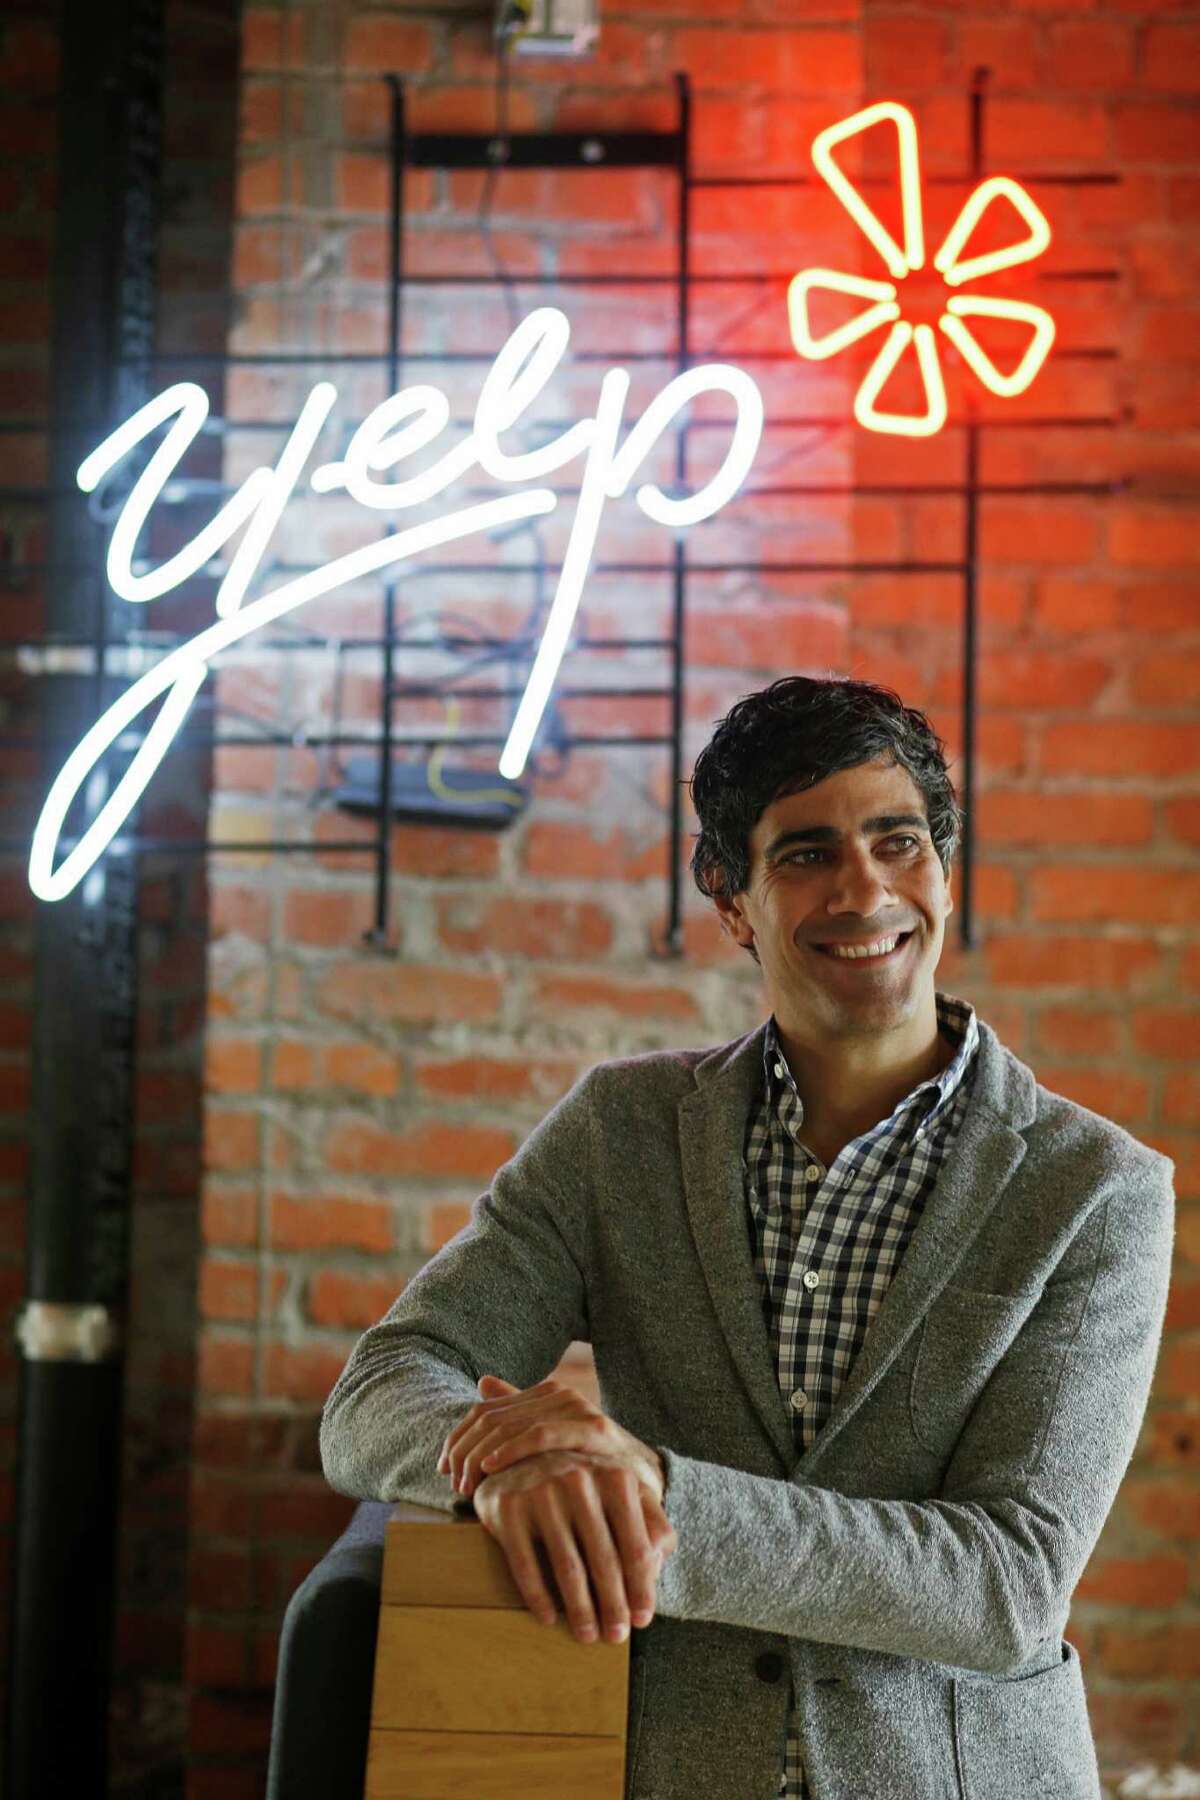 yelp ceo open letter